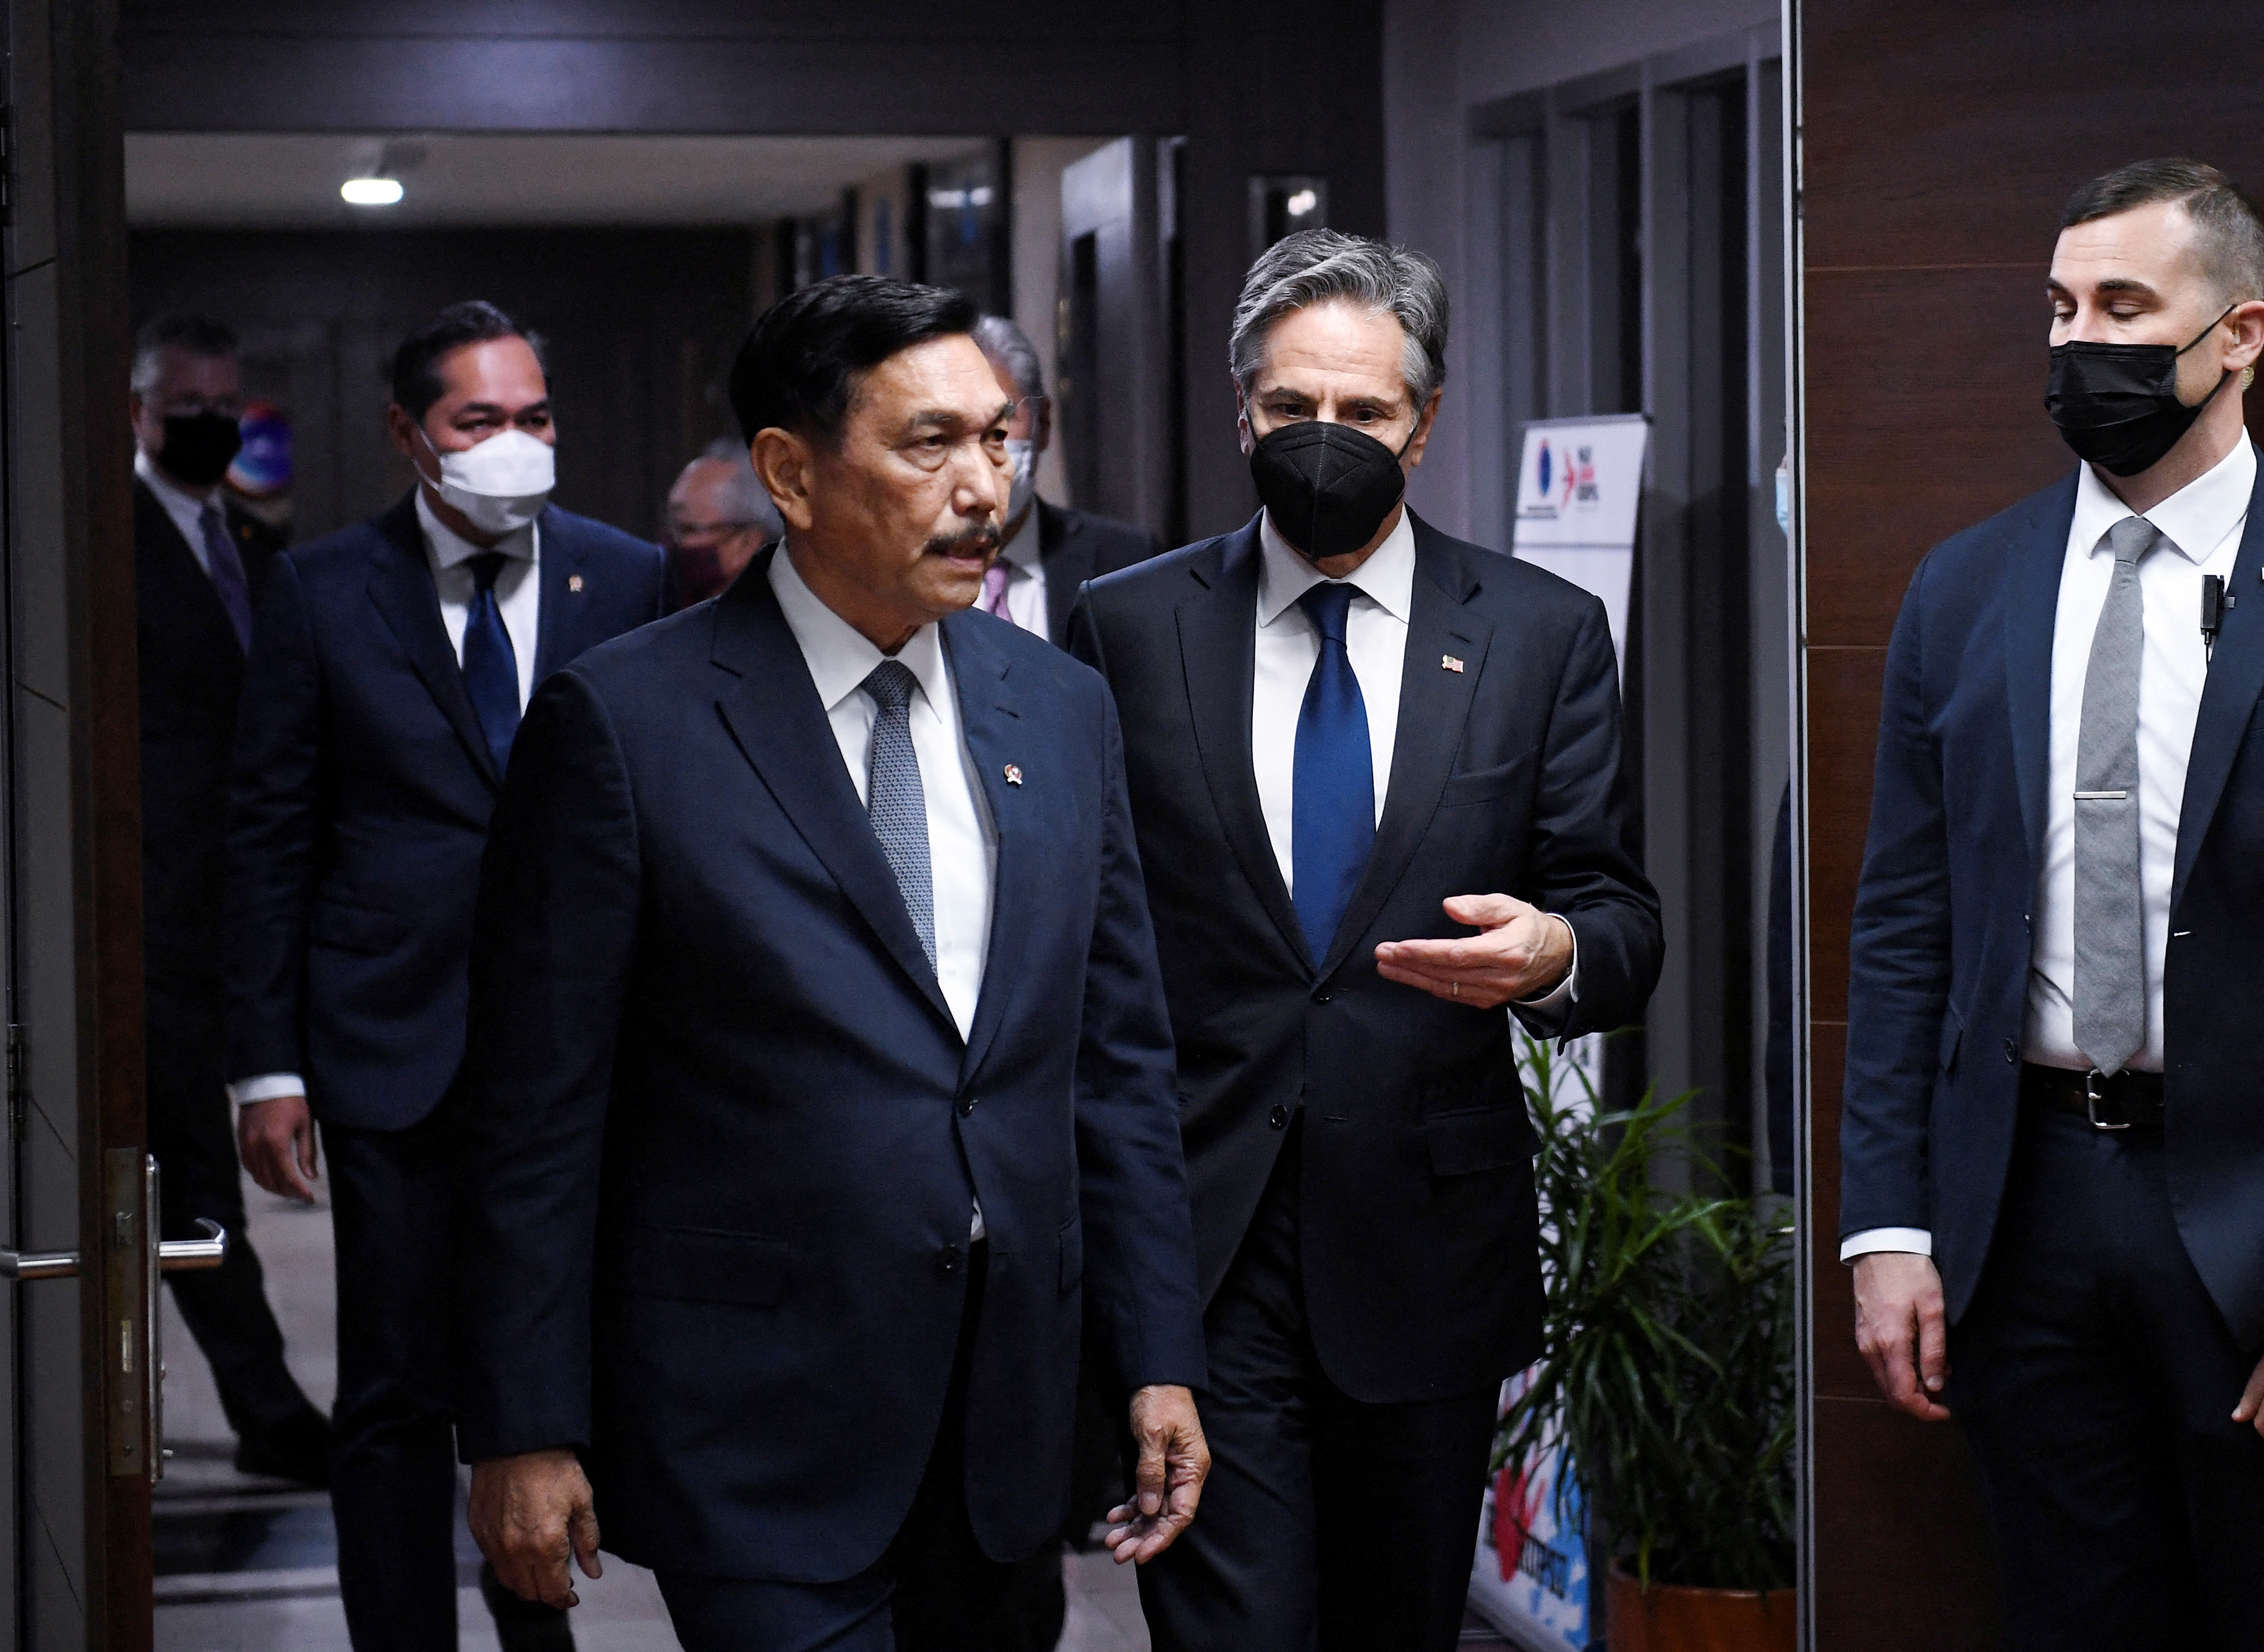 U.S. Secretary of State Antony Blinken and Coordinating Minister for Maritime Affairs and Investment Luhut Binsar Pandjaitan arrive for a meeting at the Coordinating Ministry for Maritime Affairs and Investment in Jakarta